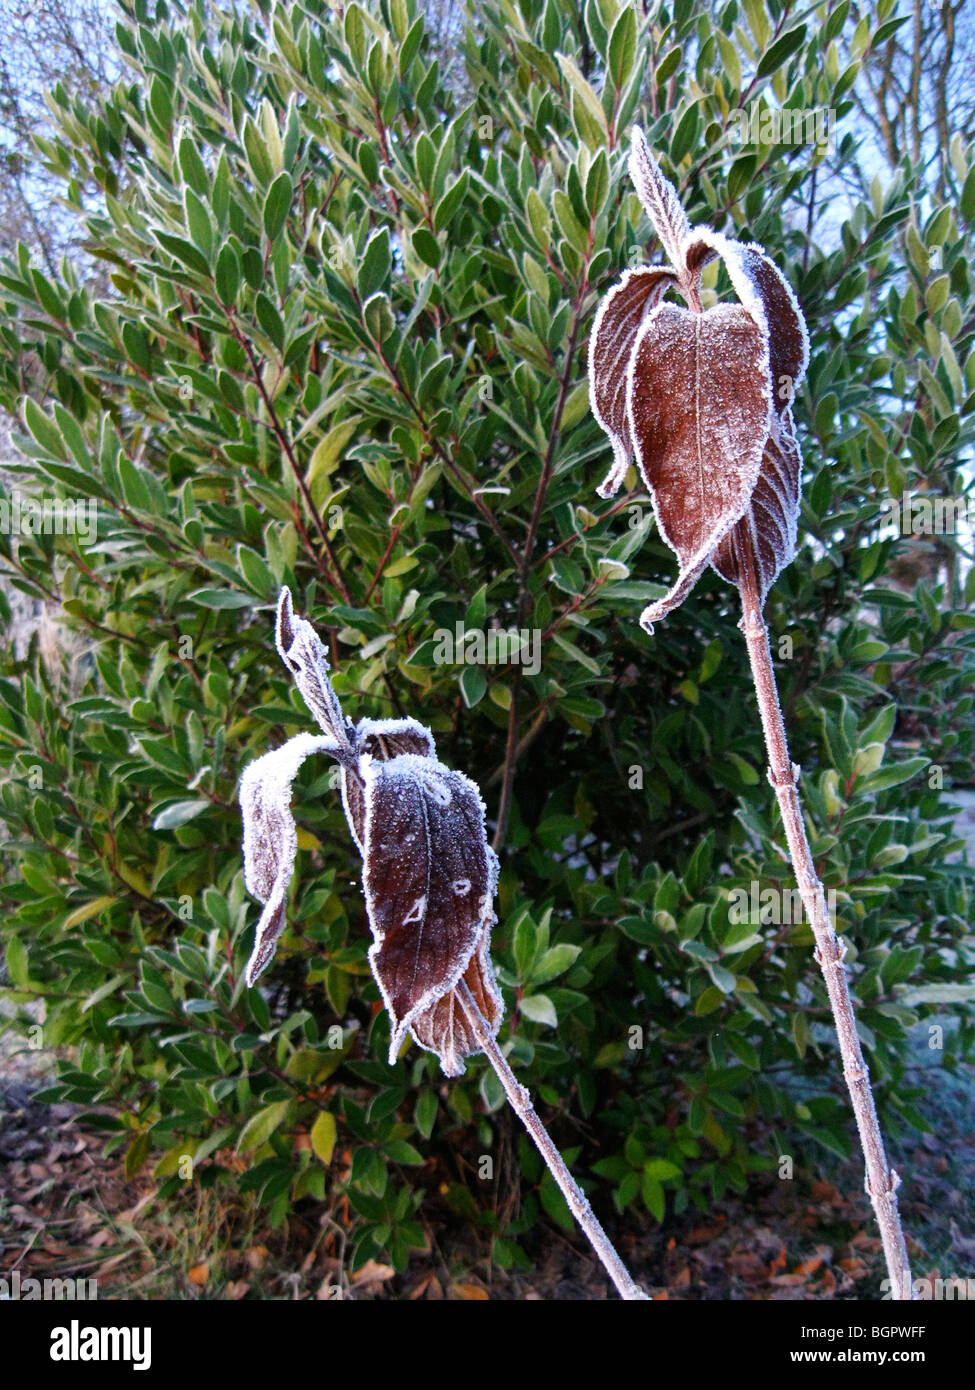 A frozen Weigela plant in winter (Bristol Ruby Red variety), placed in front of a lush green bush Stock Photo